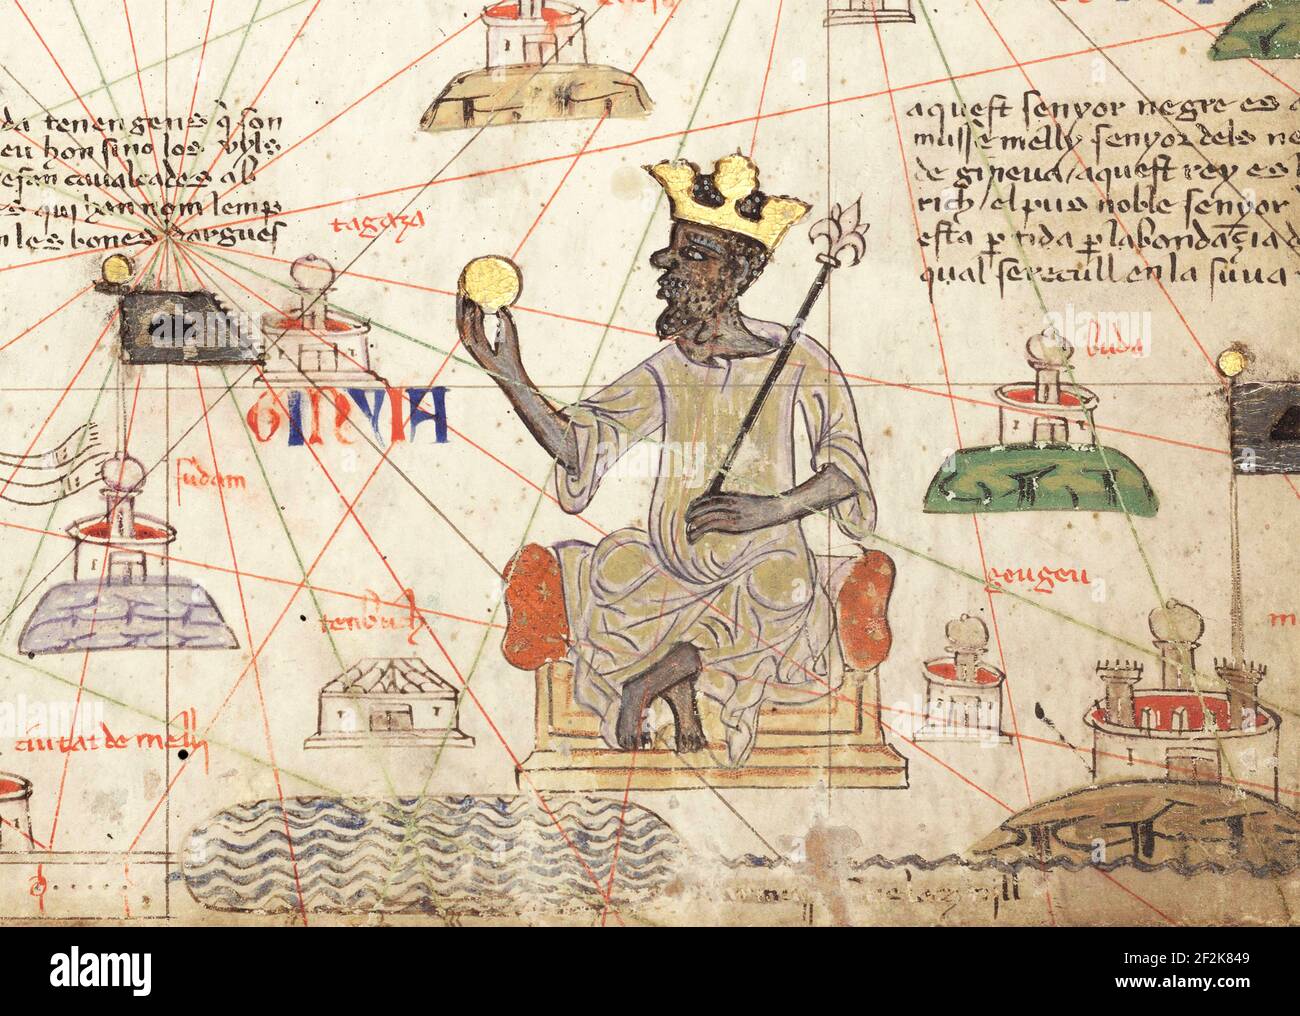 Mansa Musa. Detail from the Catalan Atlas showing the emperor of the Mali Empire, Musa I (c. 1280 - c. 1337 ) sitting on a throne and holding a gold coin; pen with coloured inks on parchment, 1375 Stock Photo